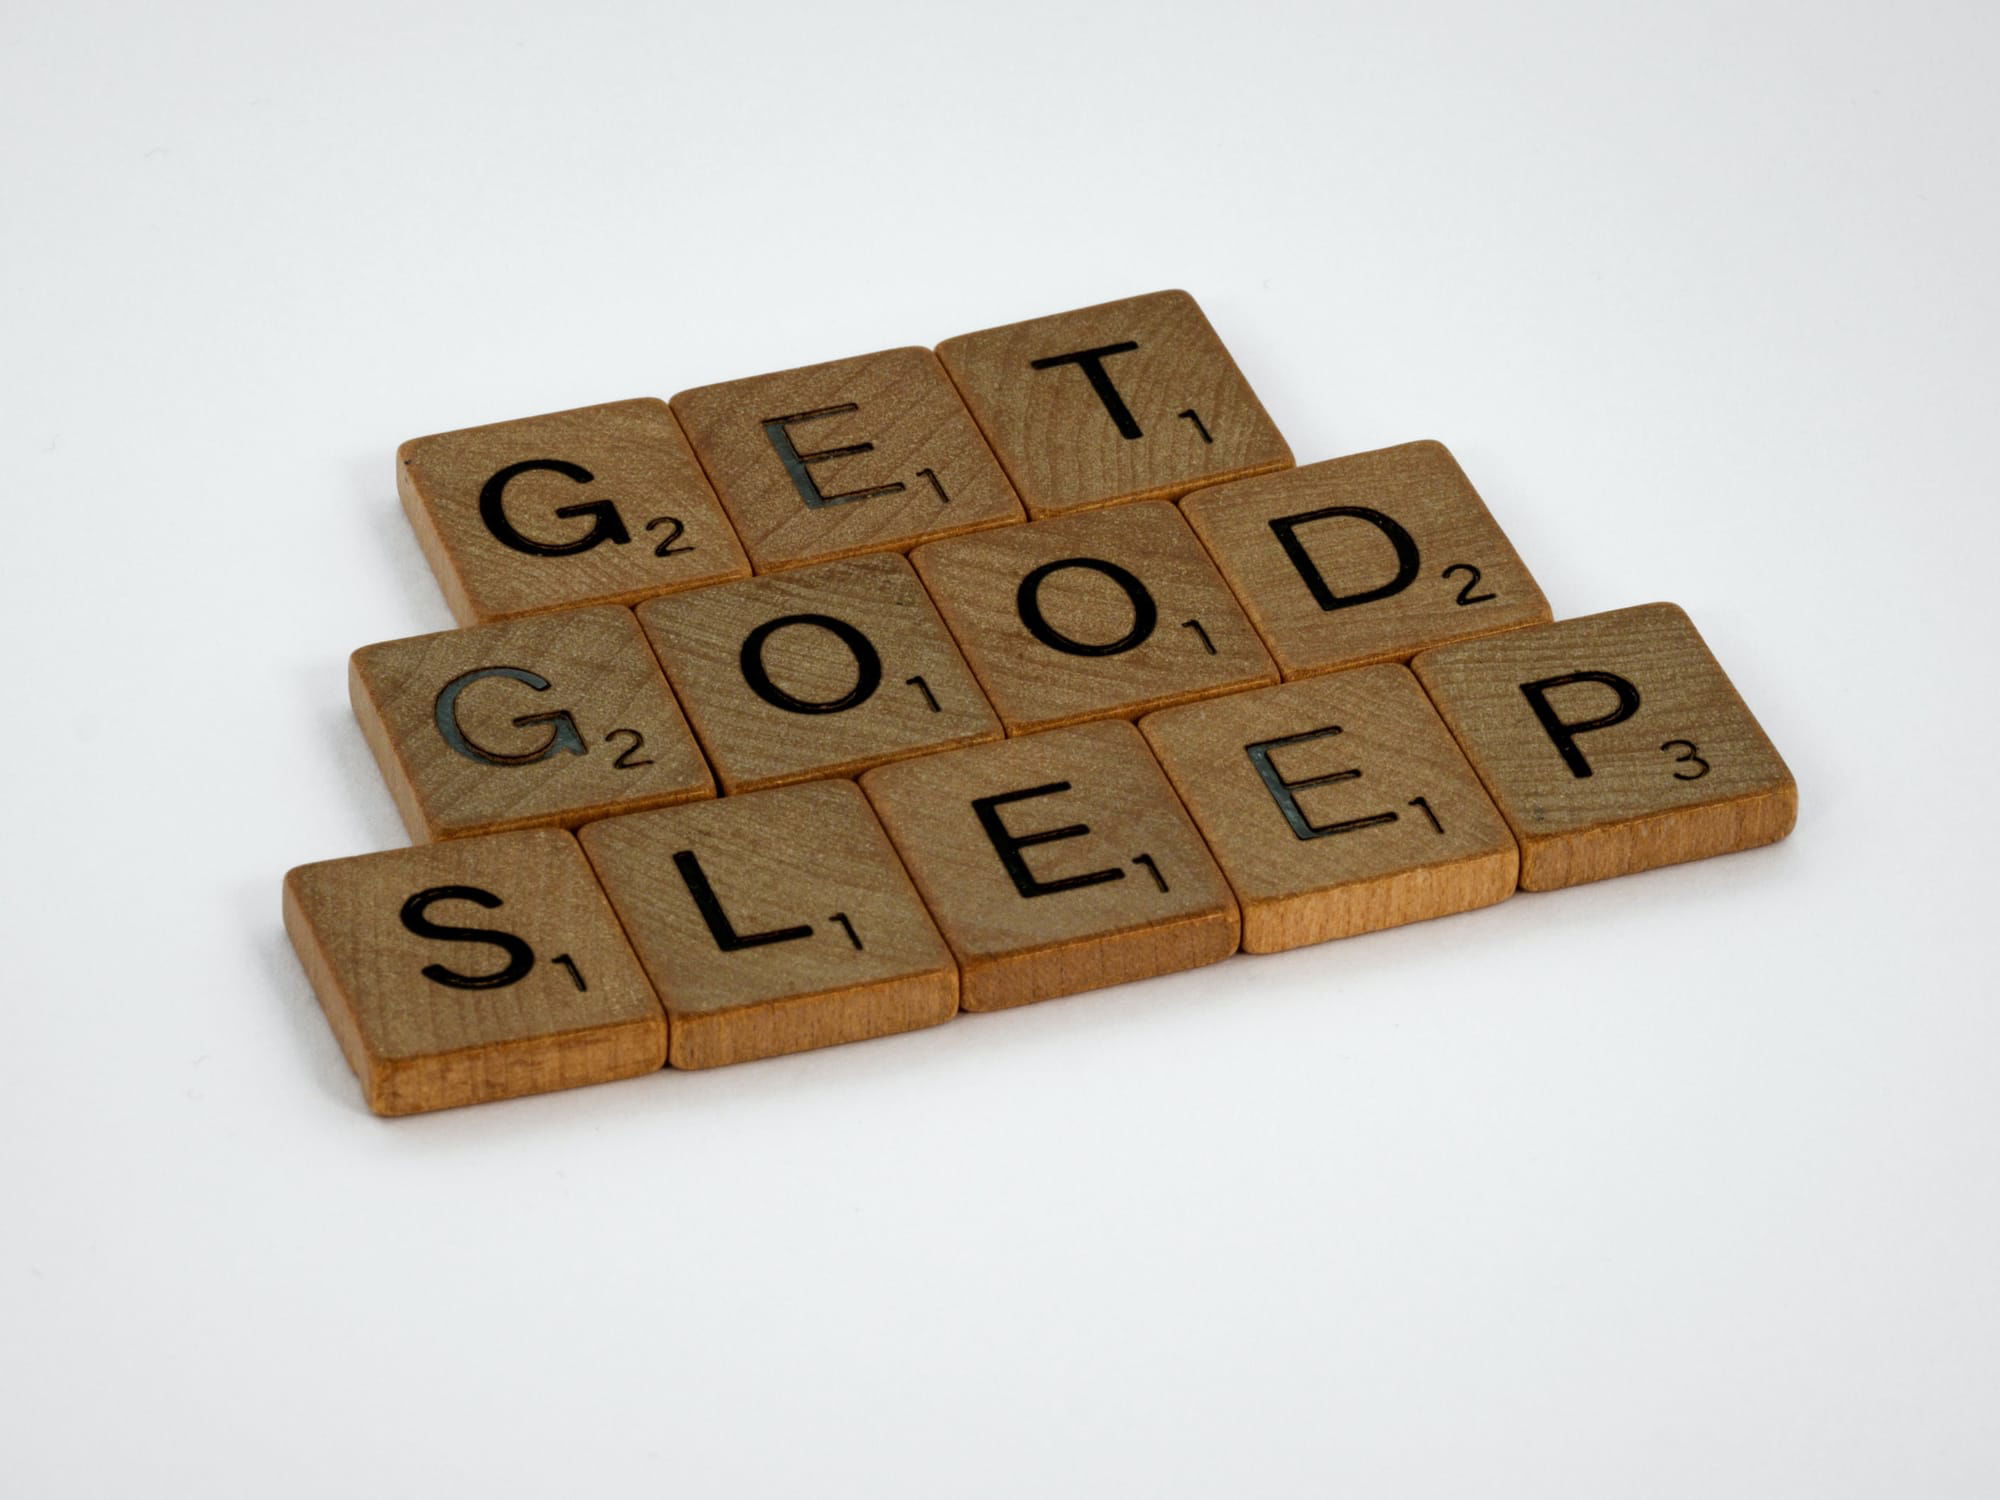 Sleep and Diabetes: 8 Tips for Quality Rest and Improved Health